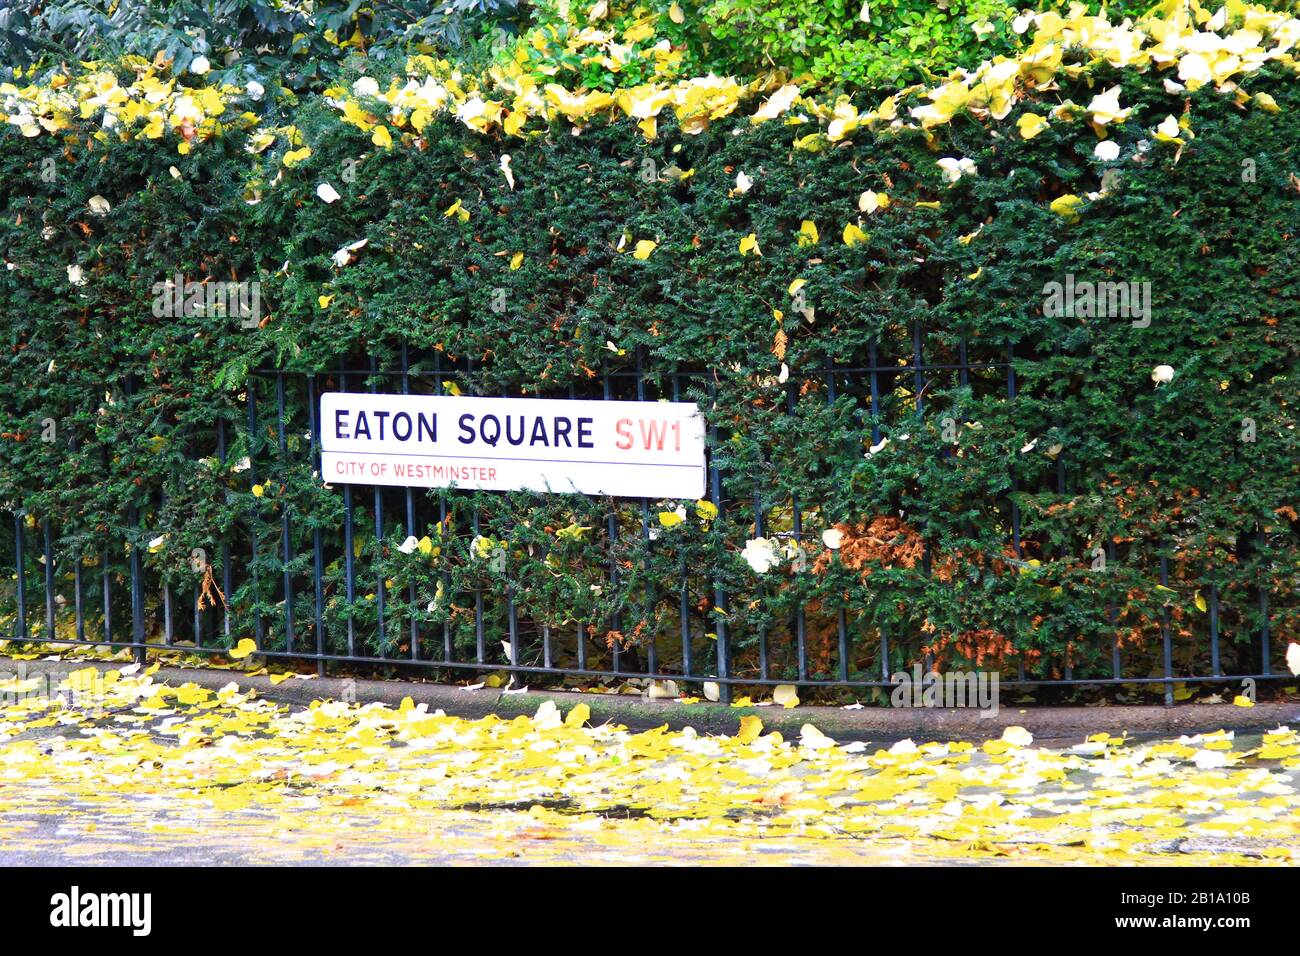 Eaton Square London, UK. Eaton Square SW1 .Street sign in a prestigious area of central London. High property prices. Up market properties. Eaton Square is sometimes associated with Eton college but the college is not located In Eaton Square . Eaton square is located in Belgravia, London. Prestigious address. High property prices. Green city. Stock Photo